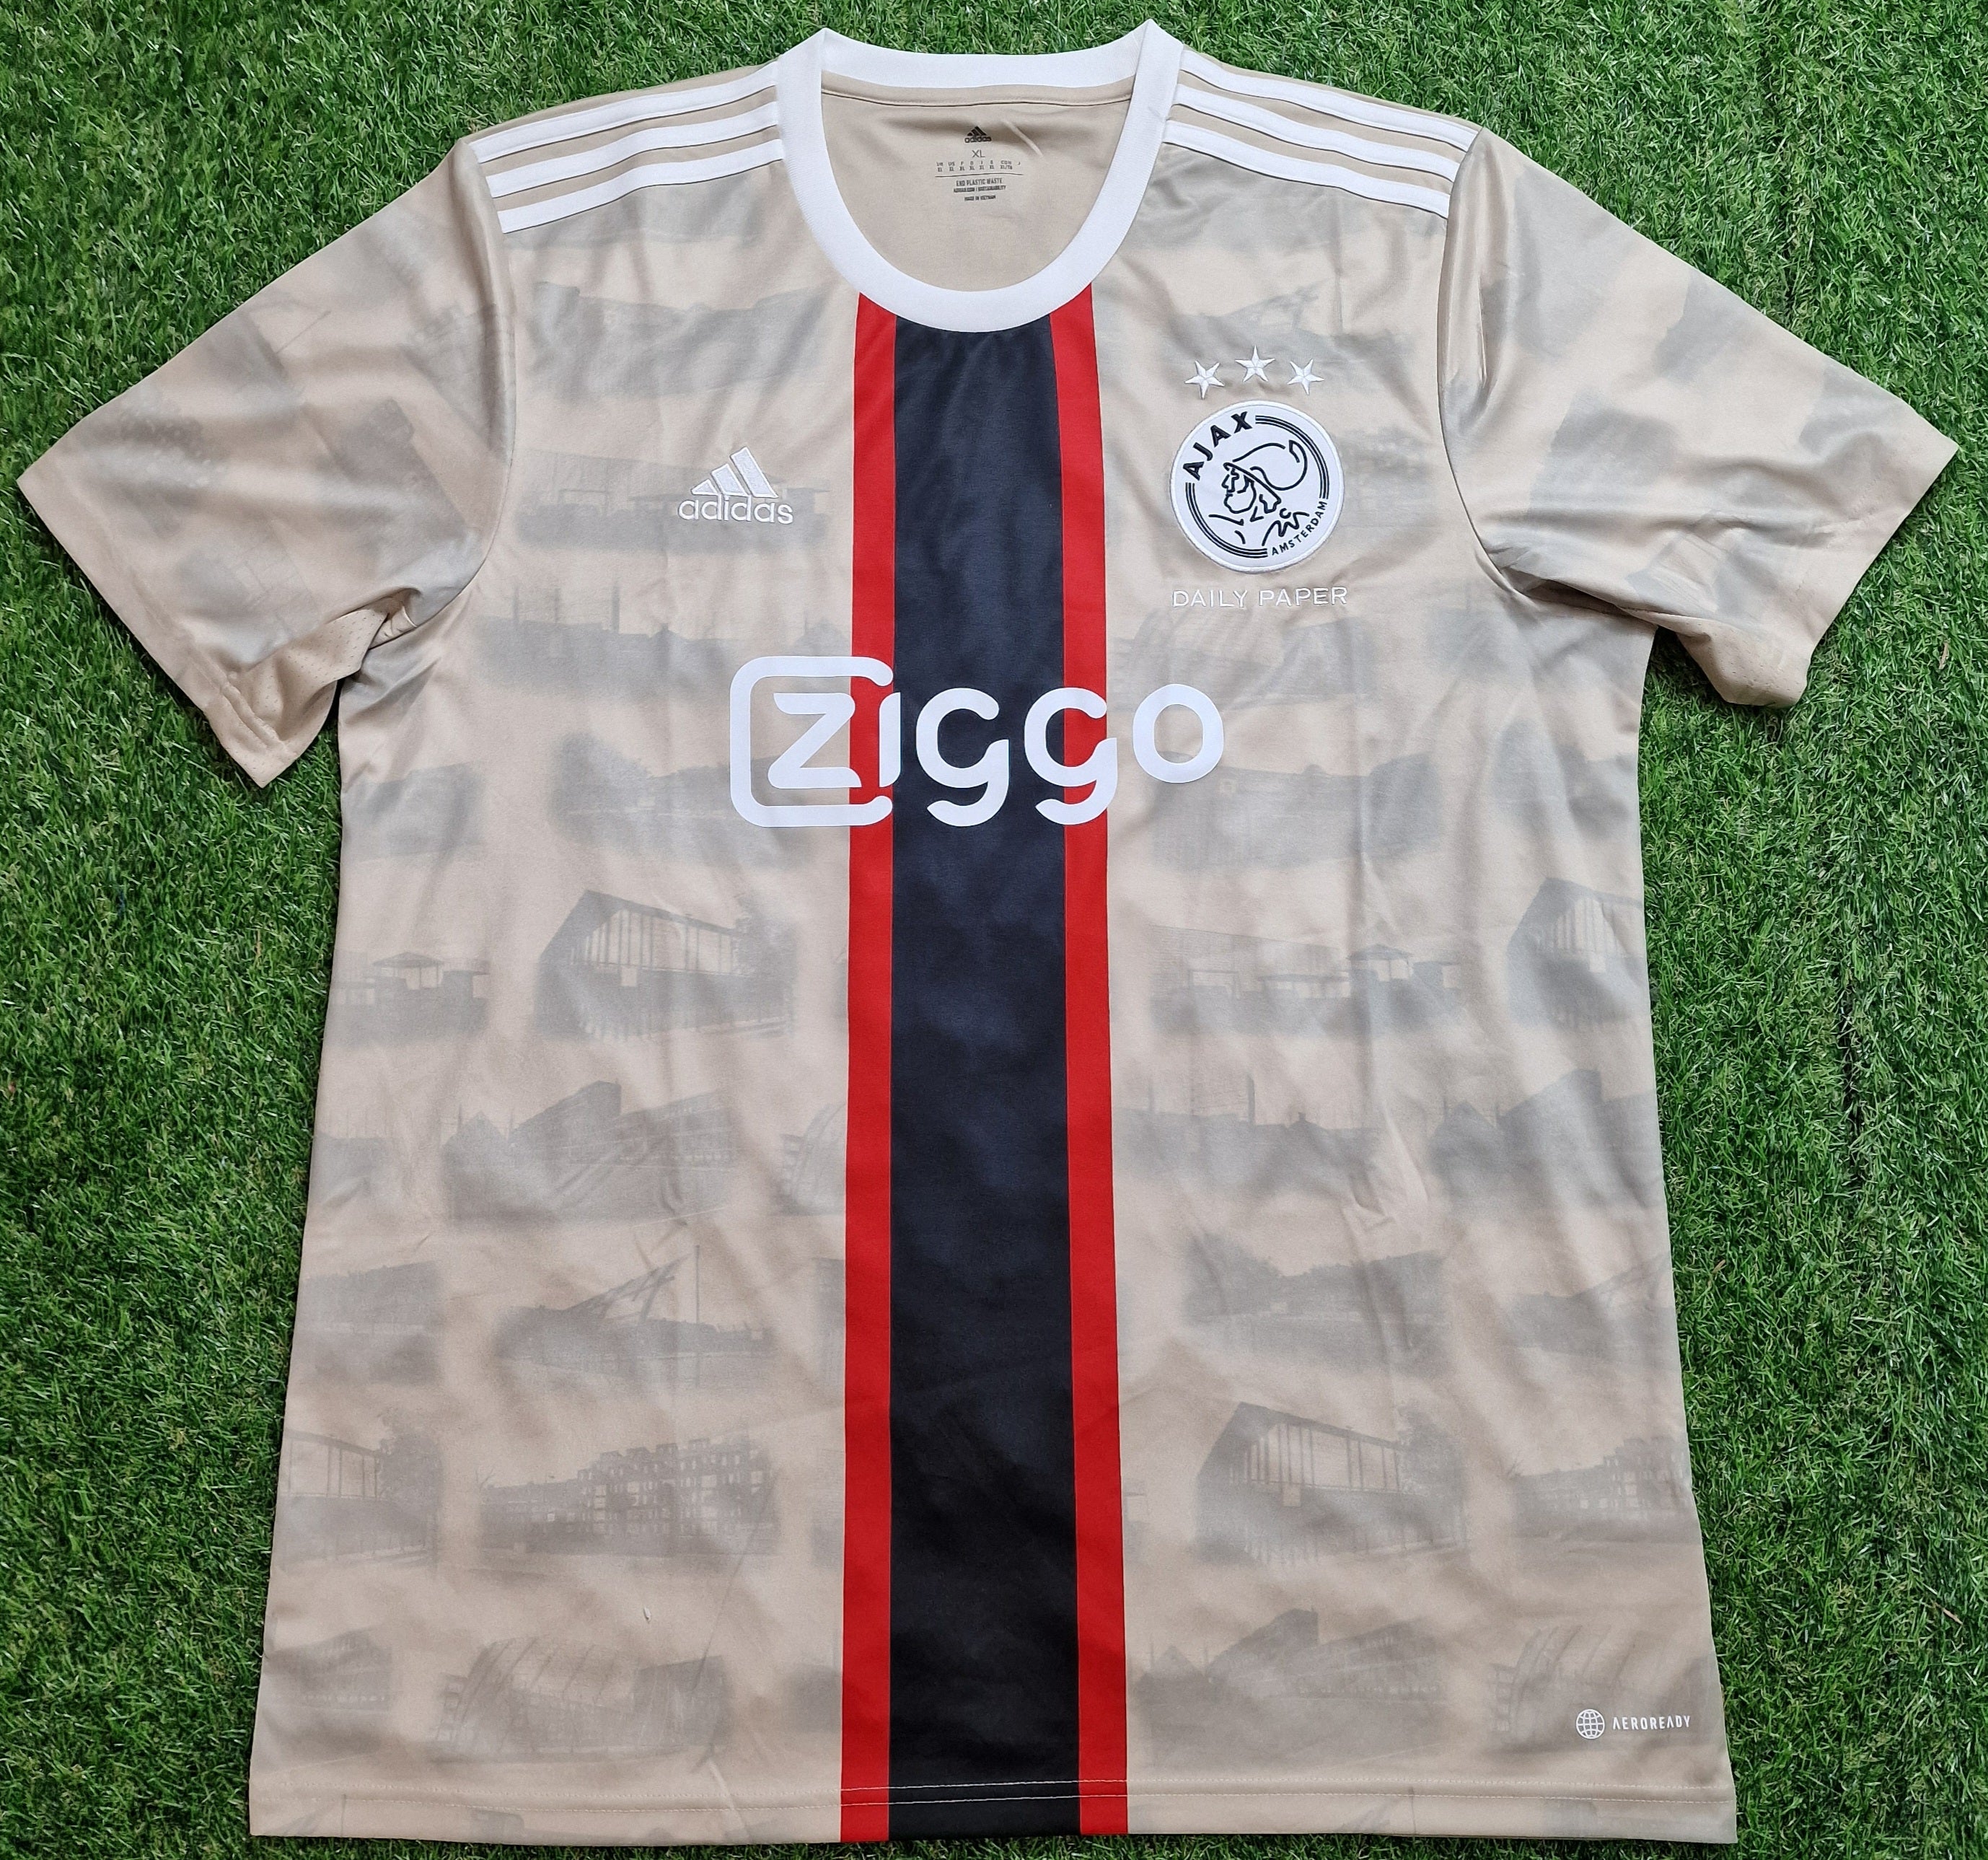 Sand brown Ajax Amsterdam X Daily Paper Football Shirt Third 22/23, featuring iconic club crest and sponsor logos, perfect for showing your support on and off the pitch.